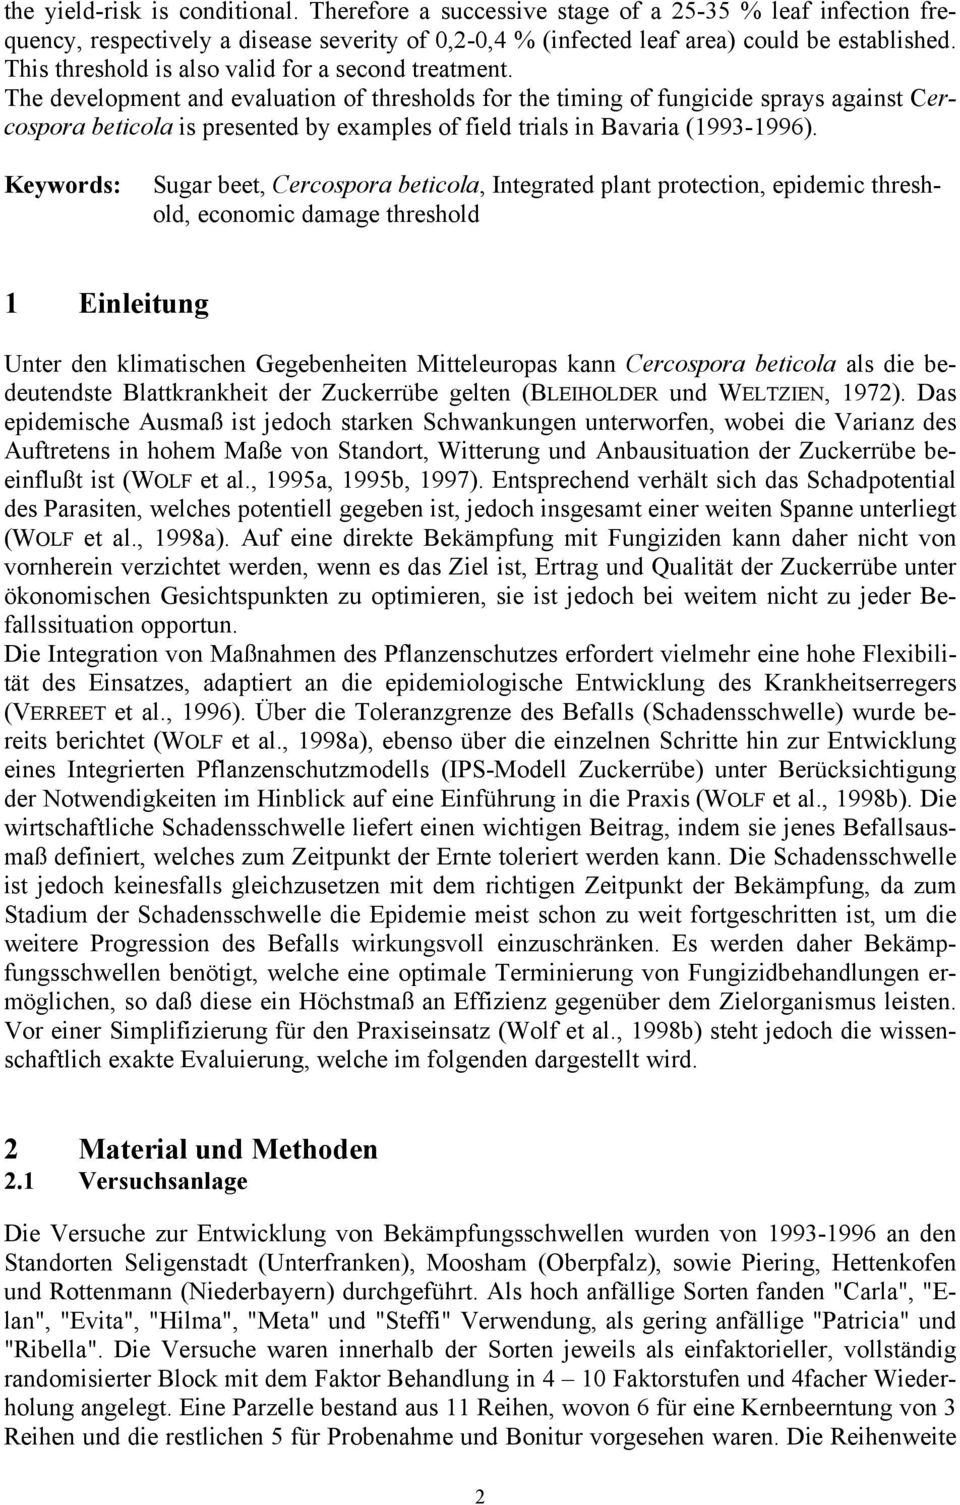 The development and evaluation of thresholds for the timing of fungicide sprays against Cercospora beticola is presented by examples of field trials in Bavaria (1993-1996).